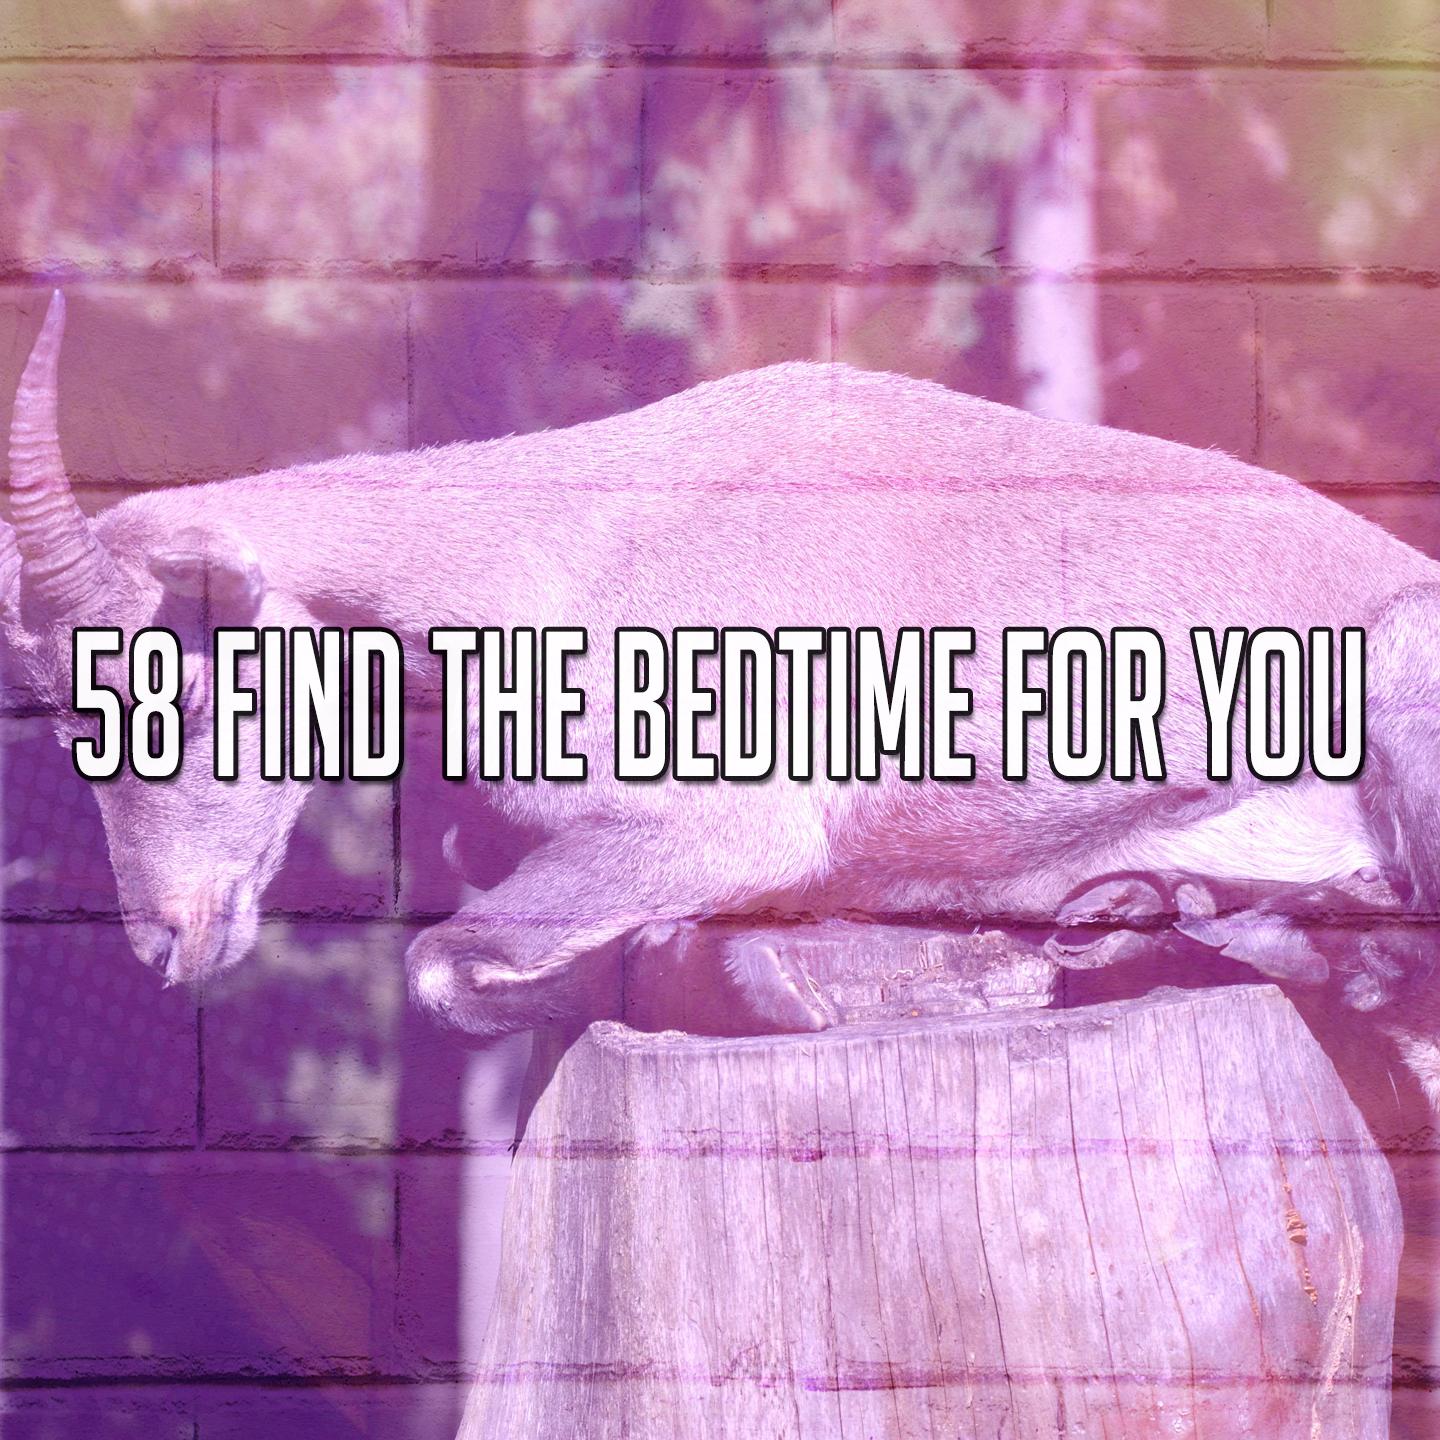 58 Find the Bedtime for You